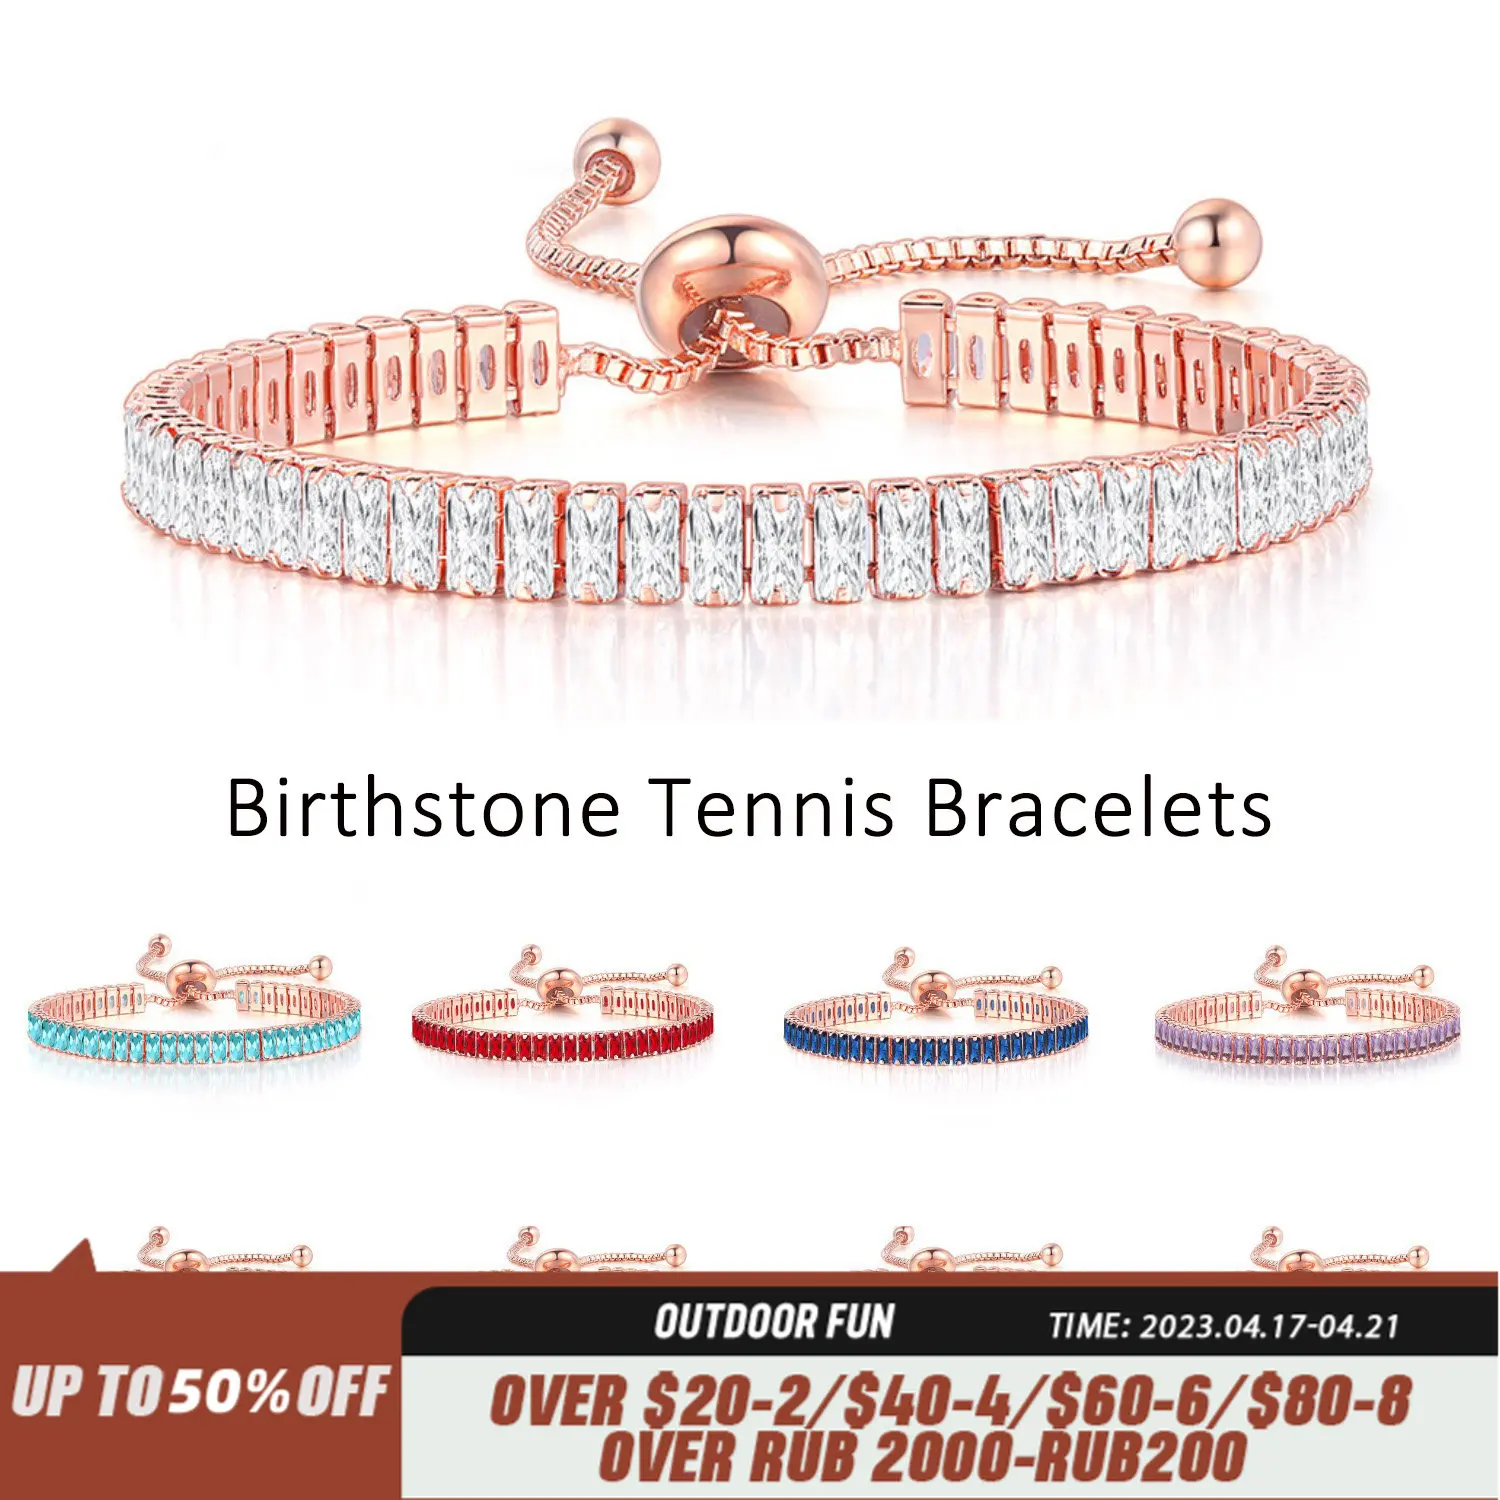 

Adjustable Birthstone Tennis Bracelet for Women Girl Shiny 2.5*5mm Zircon Crystal Chains on Hand Trend Jewelry Accessories Gift